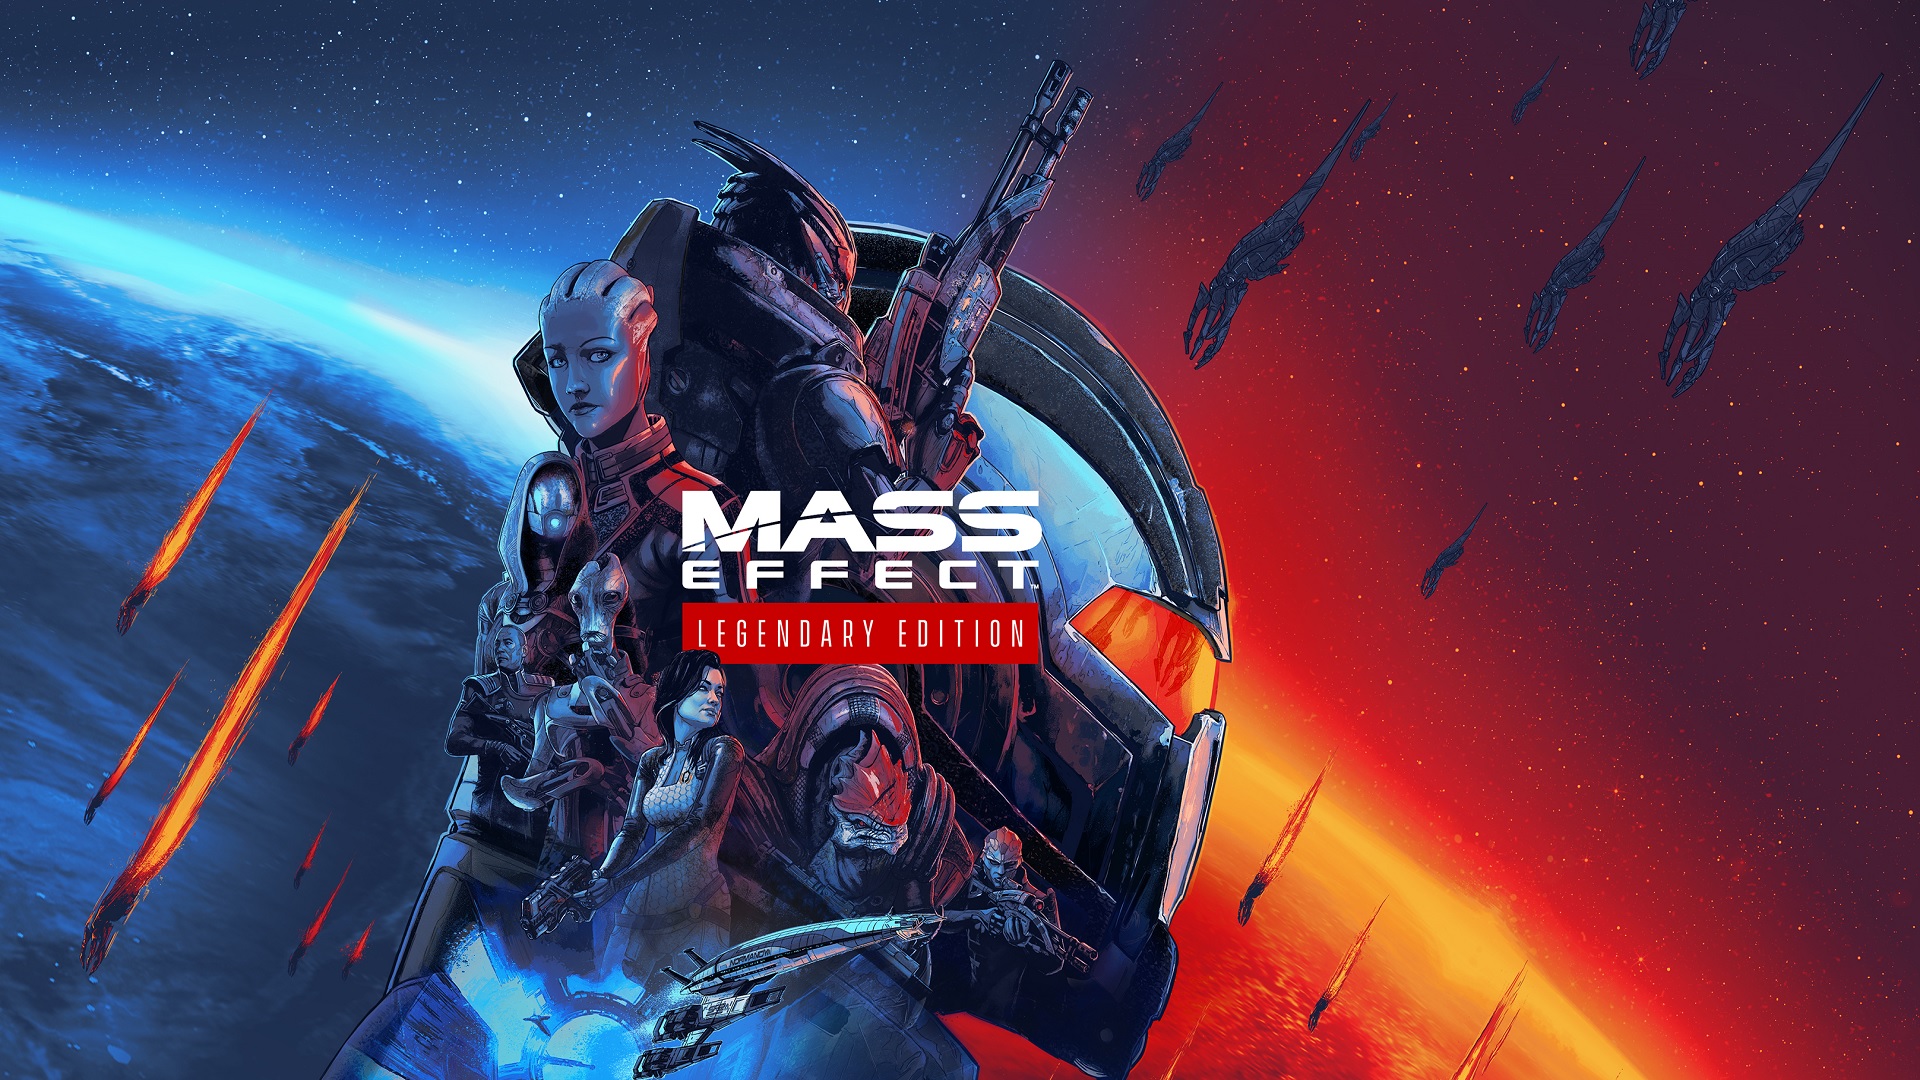 ps-plus-december-games-consist-of-2-of-the-best-rpgs-of-perpetuity-as-well-as-mass-effect-3